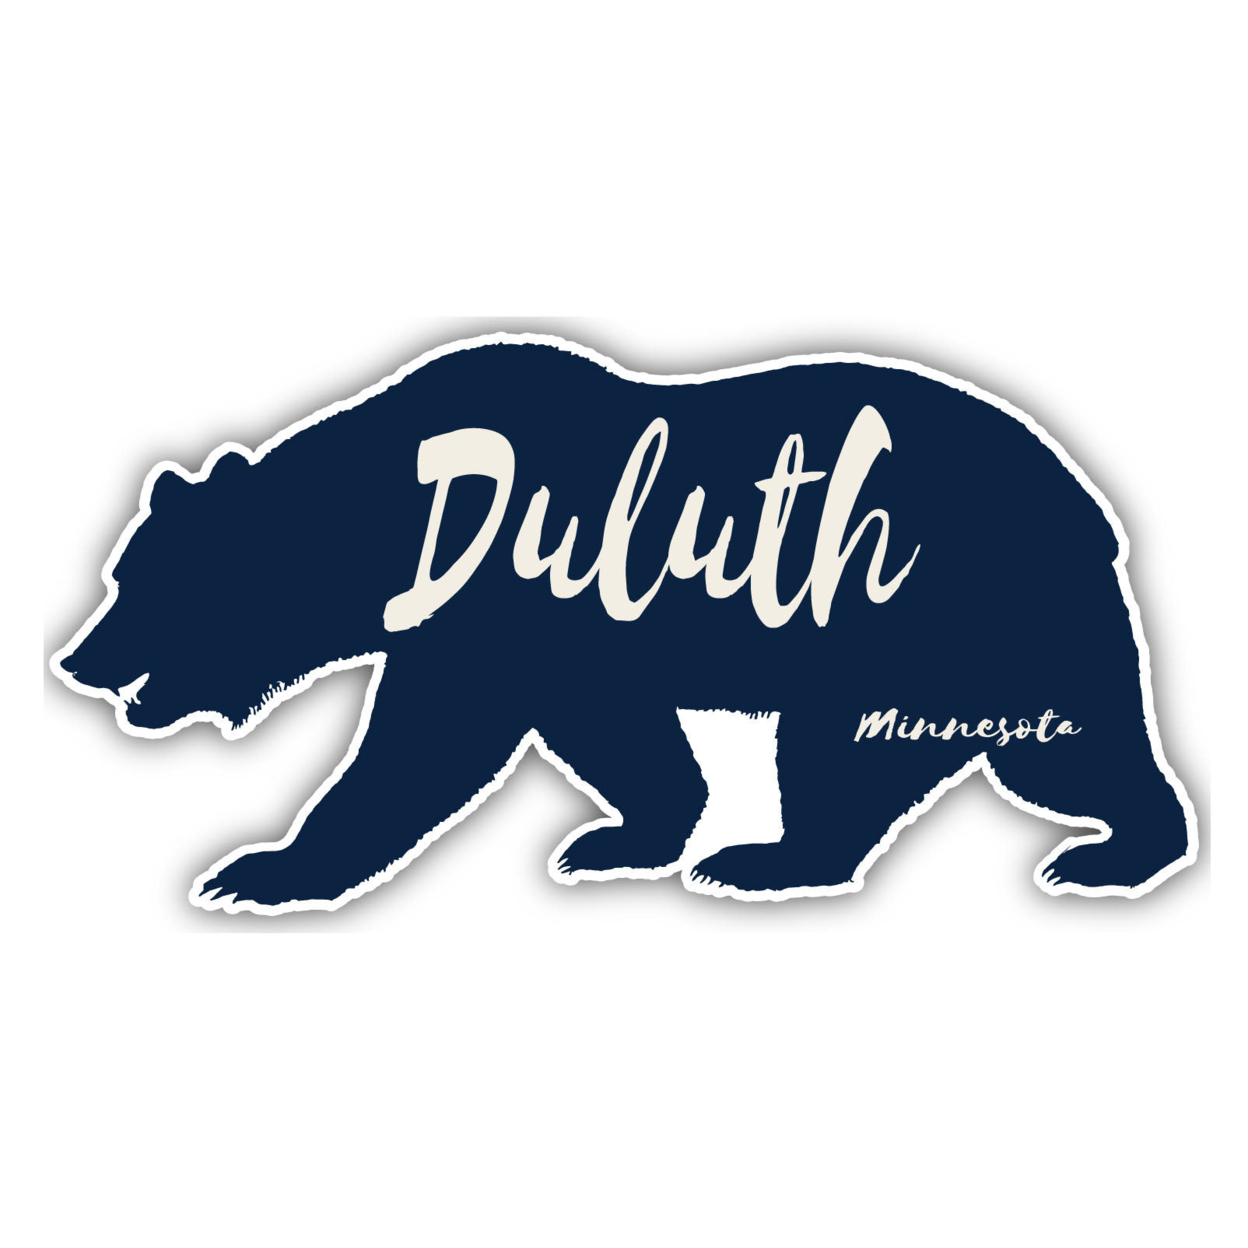 Duluth Minnesota Souvenir Decorative Stickers (Choose Theme And Size) - 4-Pack, 2-Inch, Tent